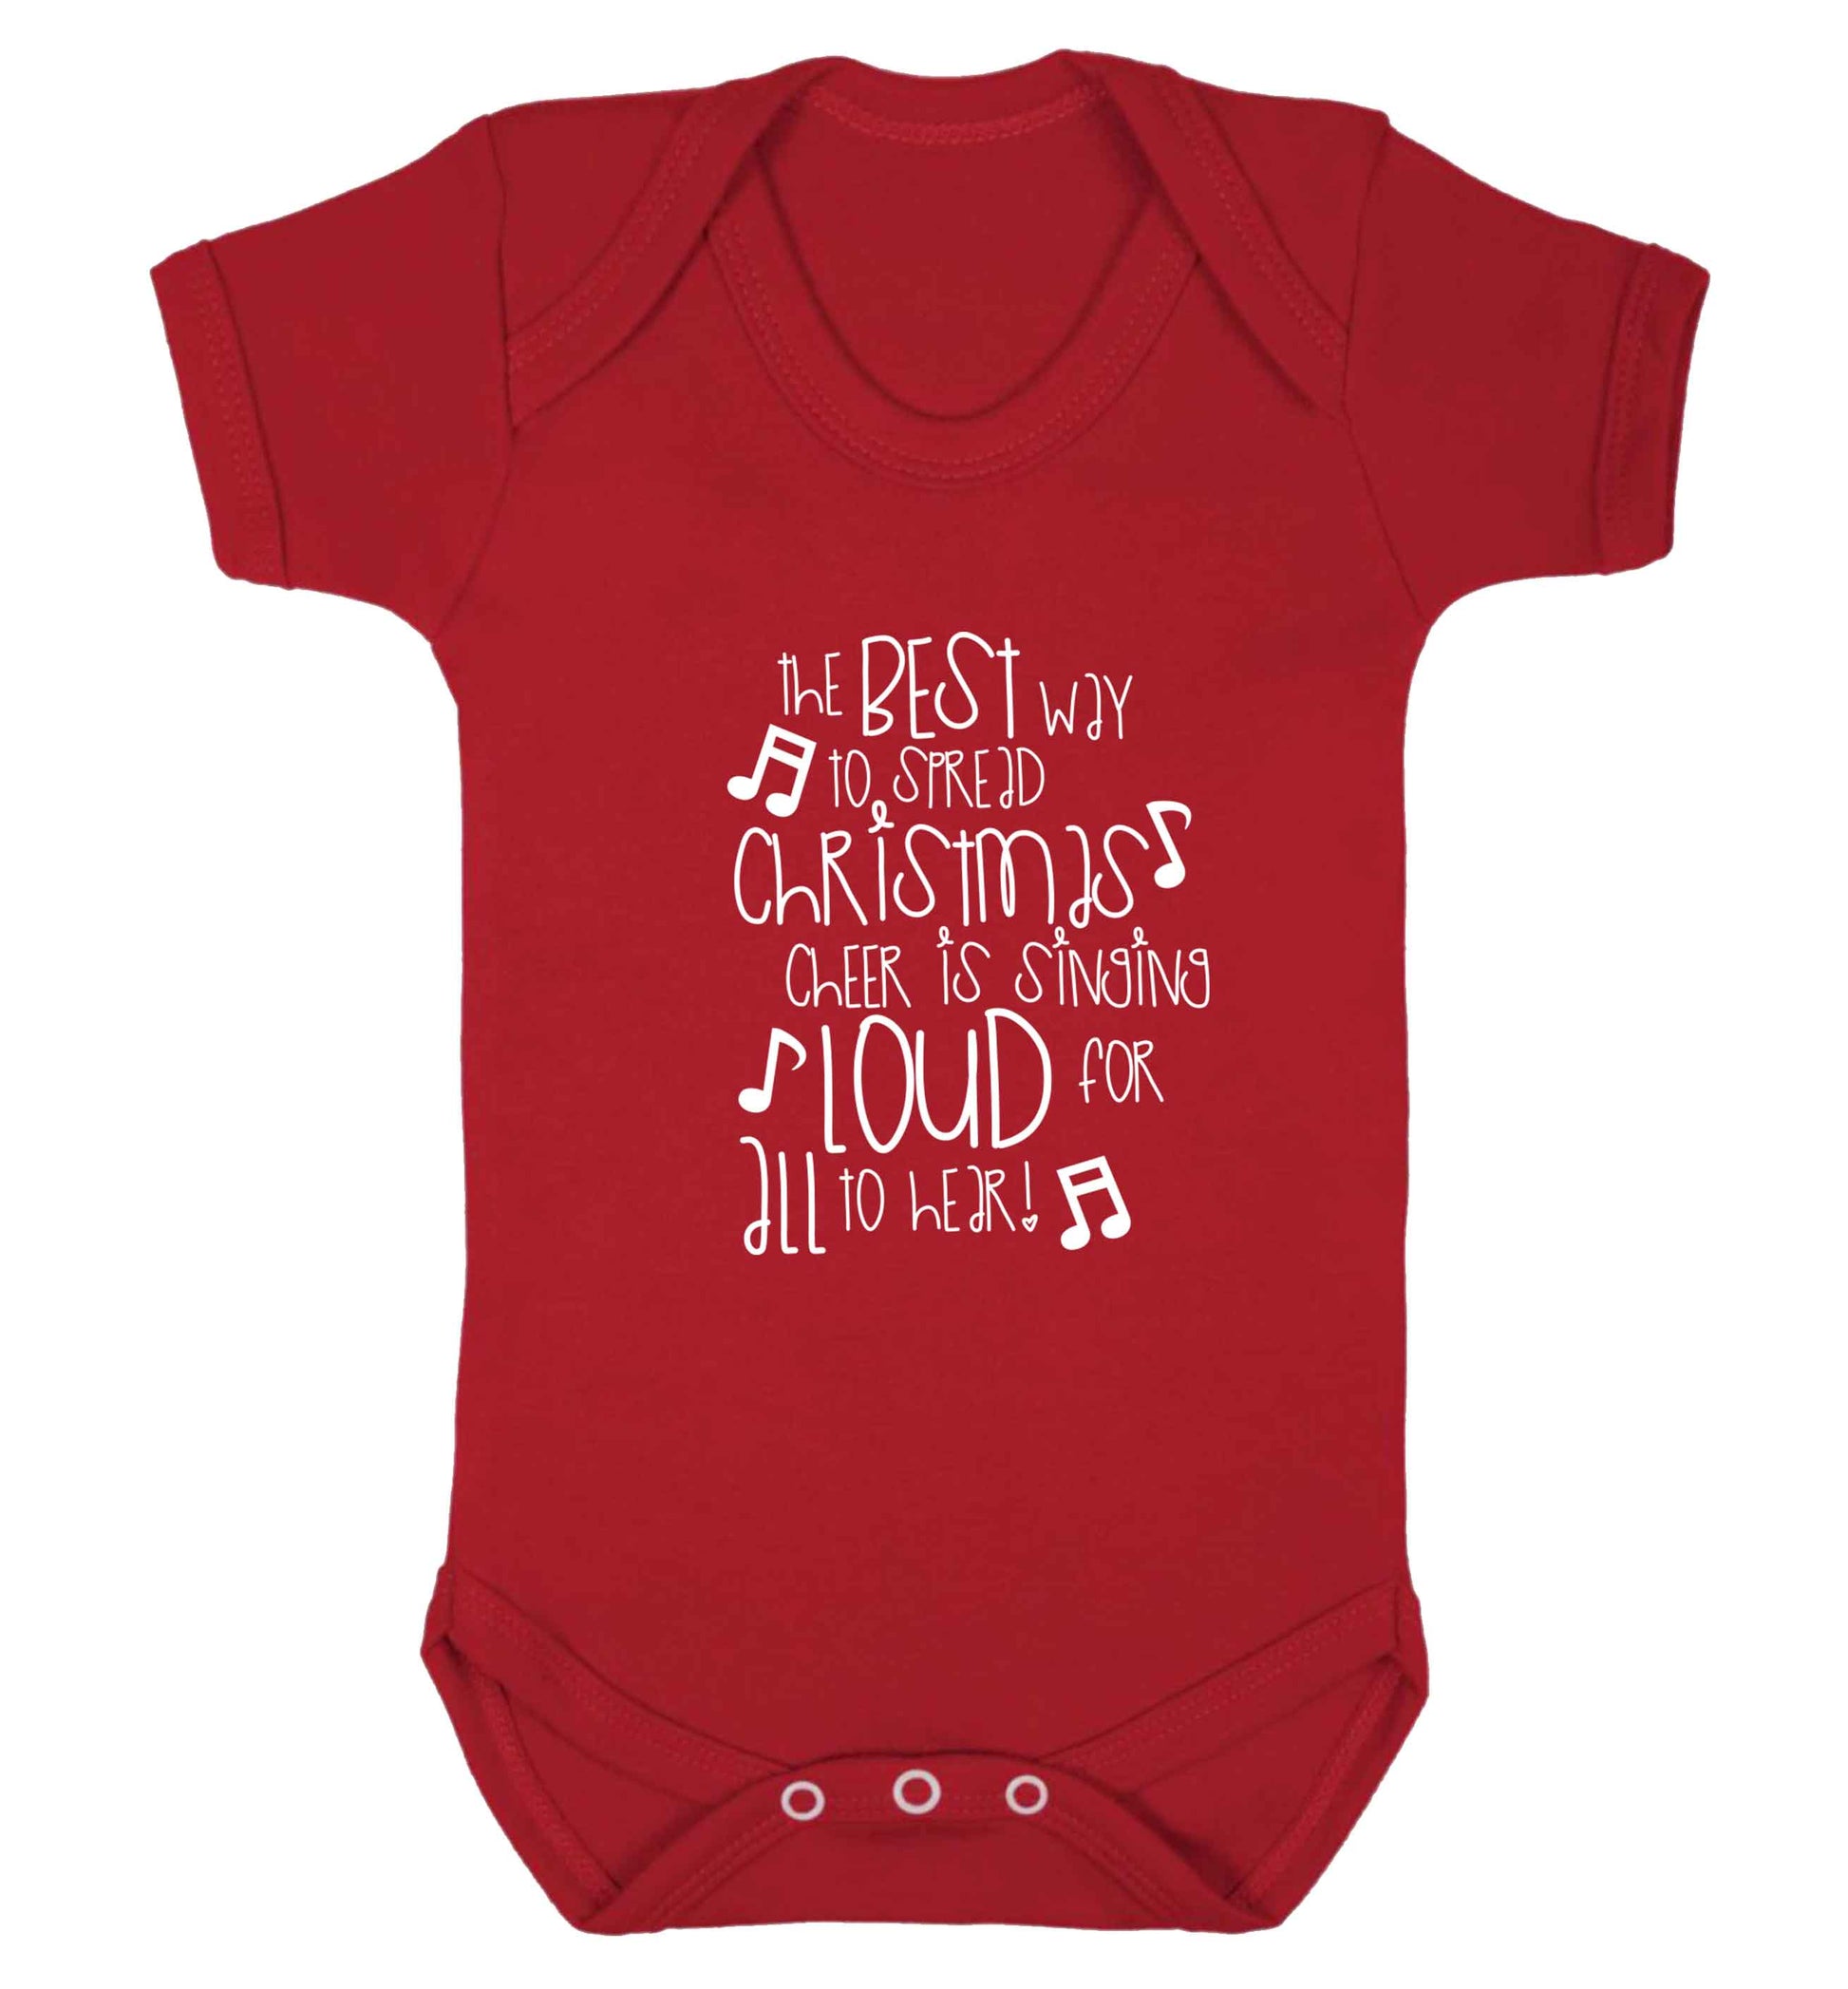 The best way to spread Christmas cheer is singing loud for all to hear baby vest red 18-24 months